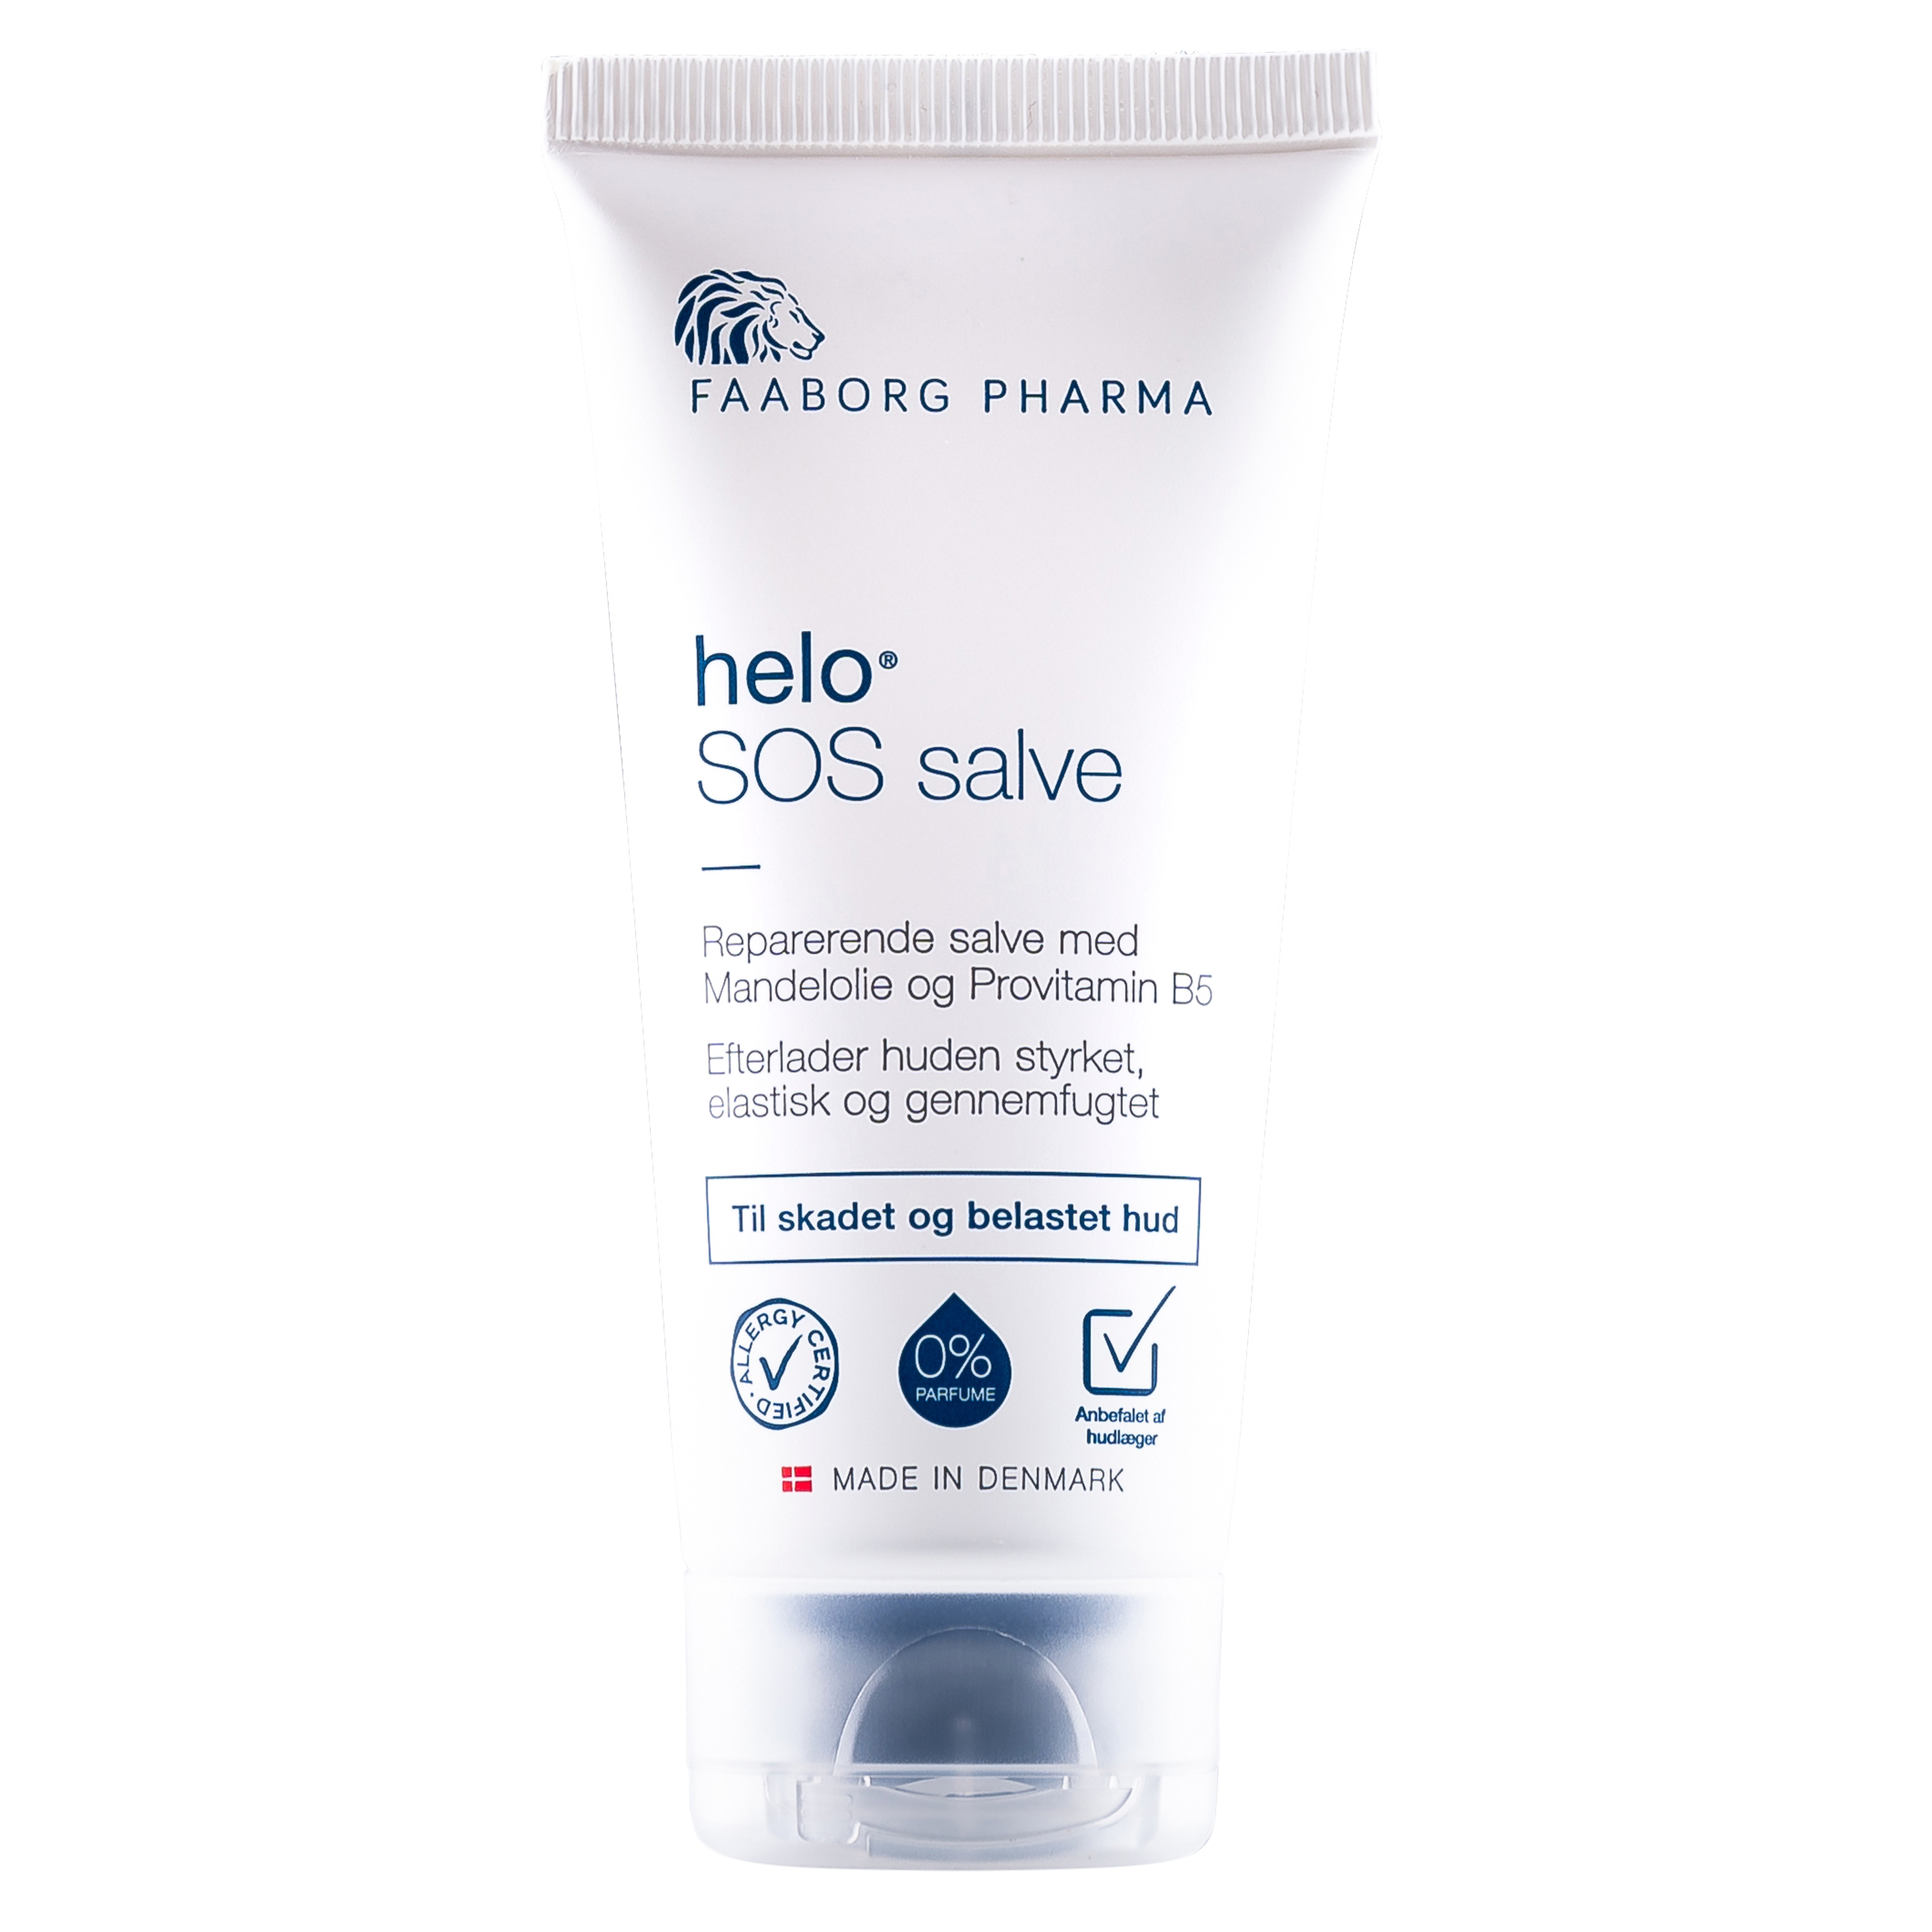 helo® SOS ointment